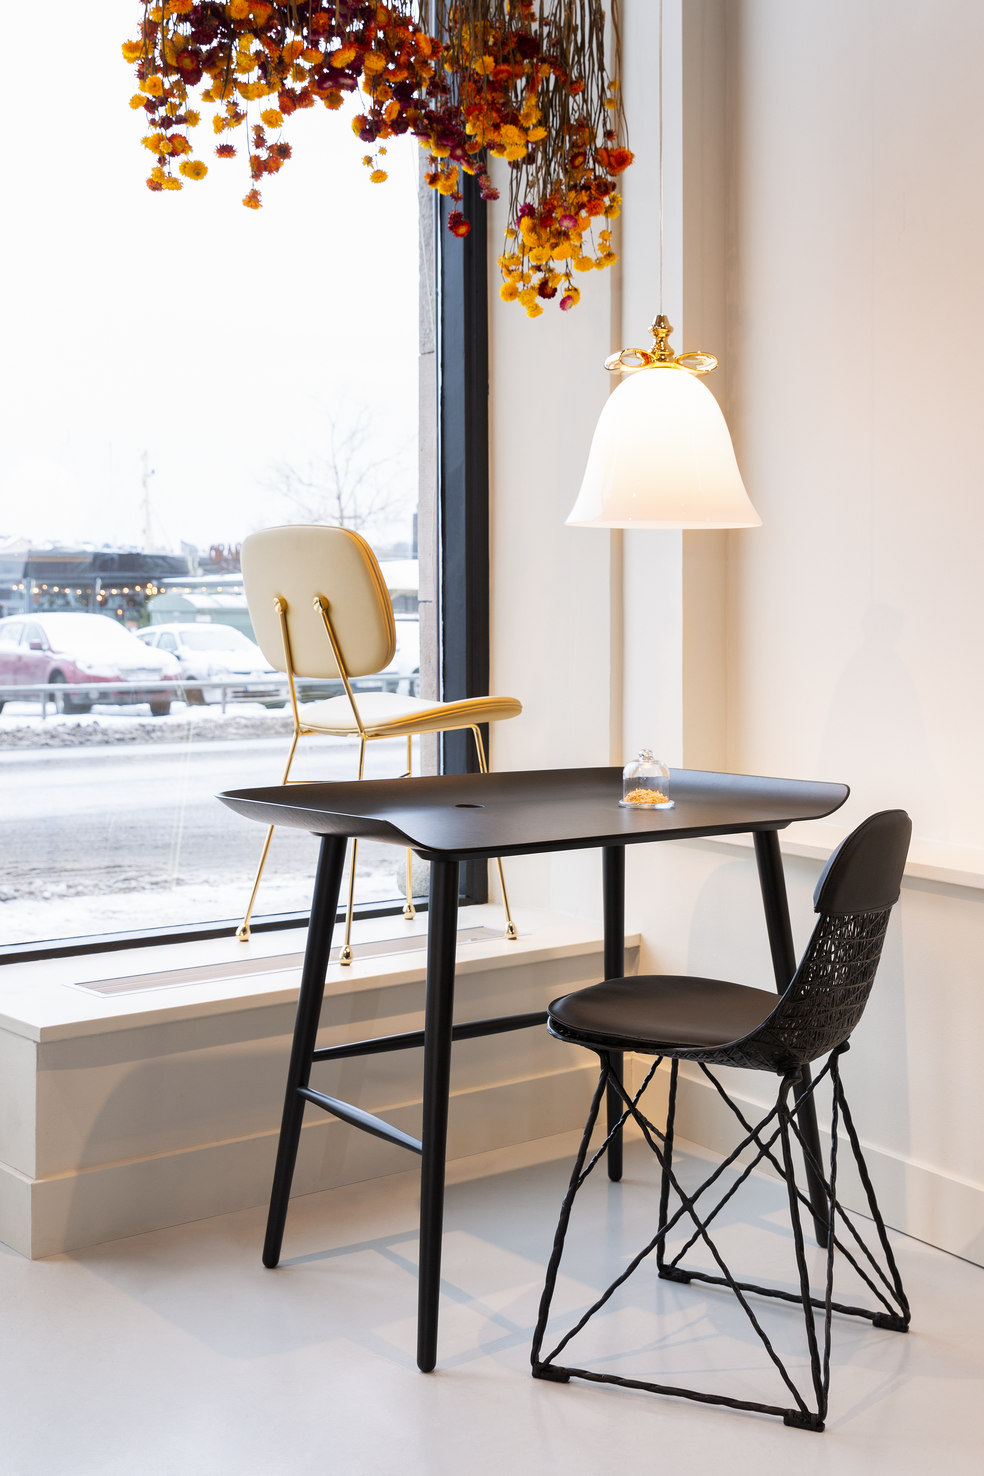 Bell lamp with a golden chair, a Carbon chair and aBlack woood table at our brand store in Stockholm 